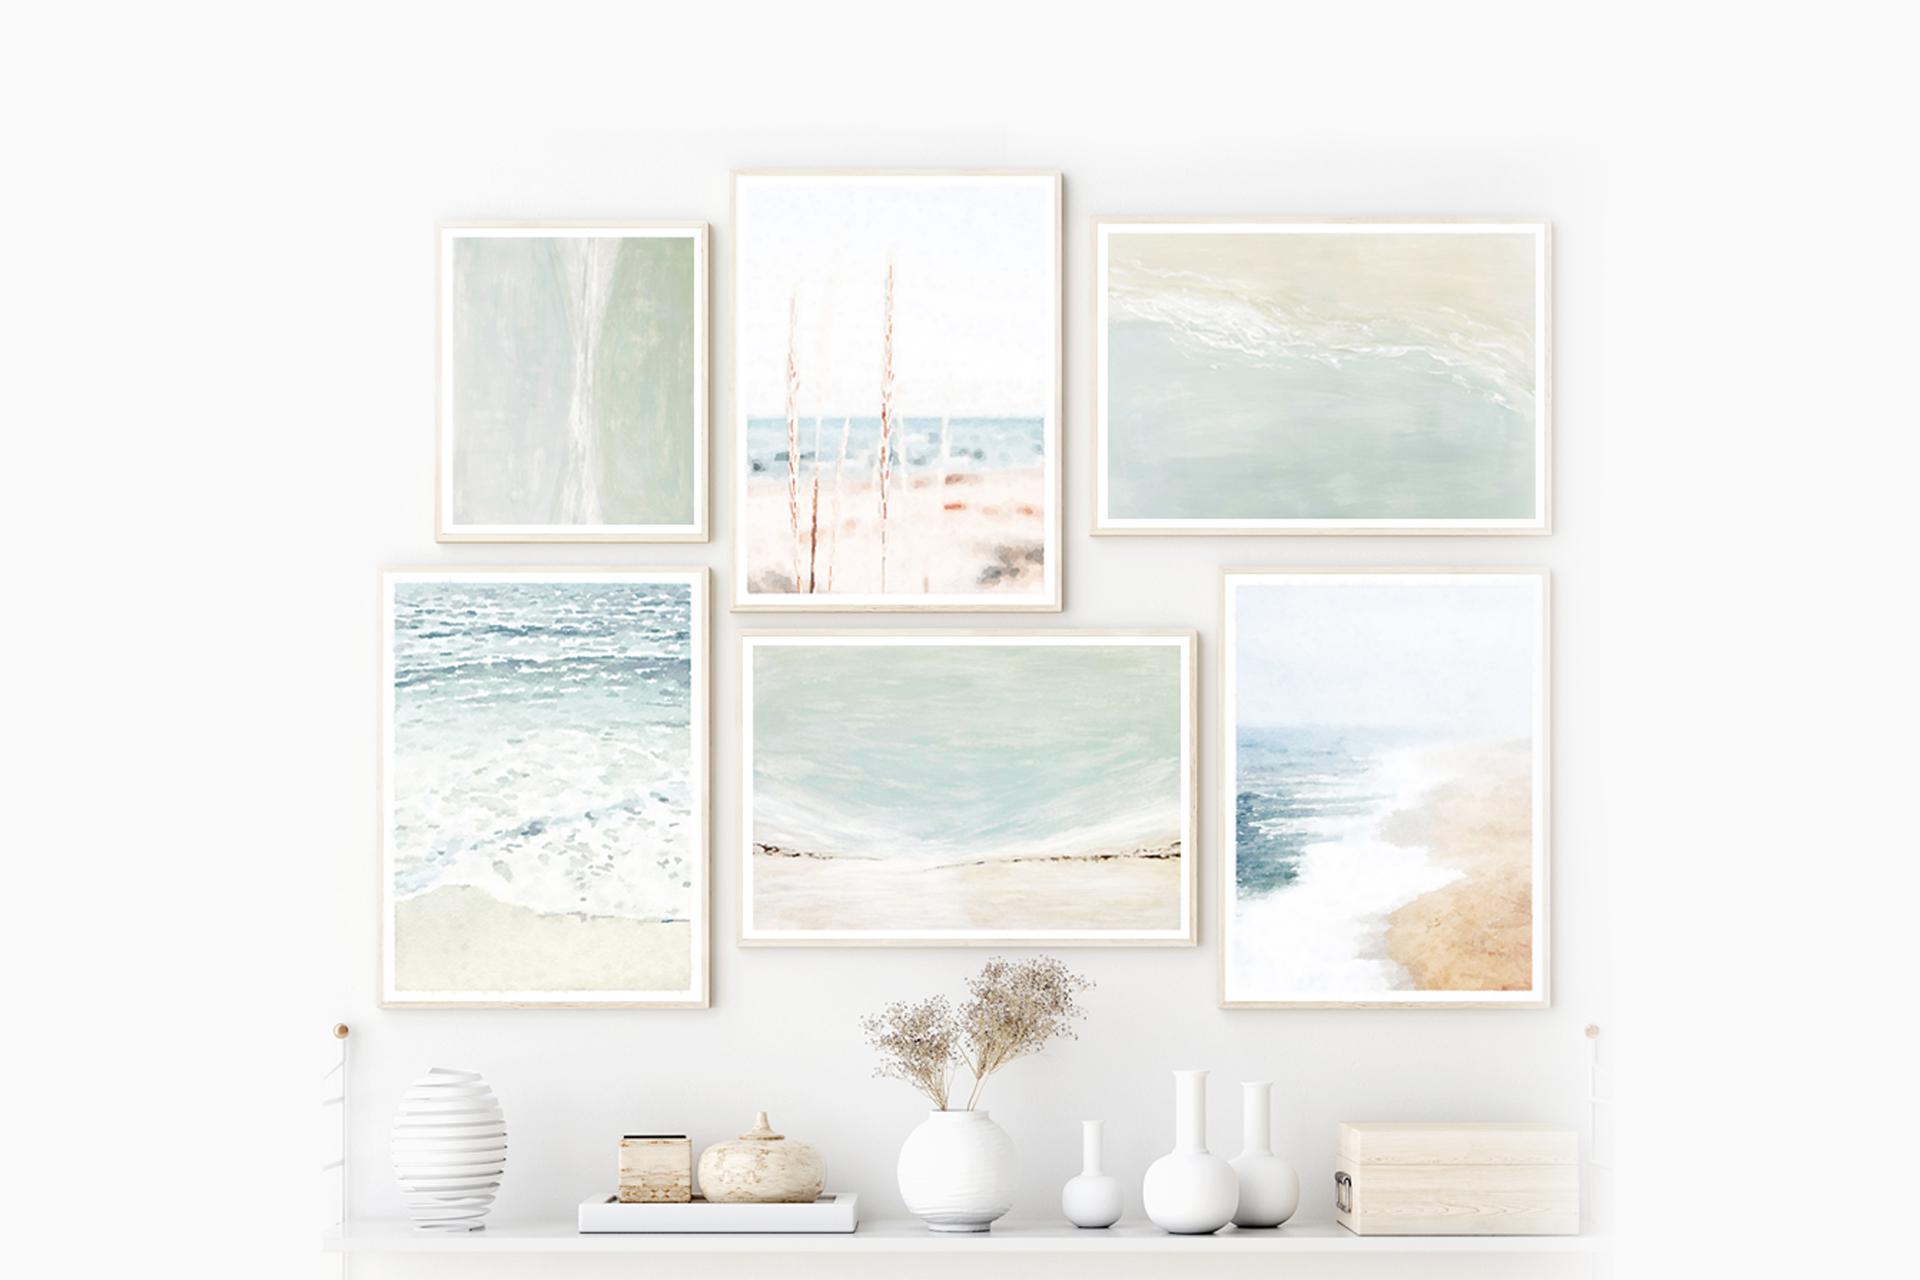 6 Coastal Beach Decor Ideas to Steal Without Turning Your House into a Cliche